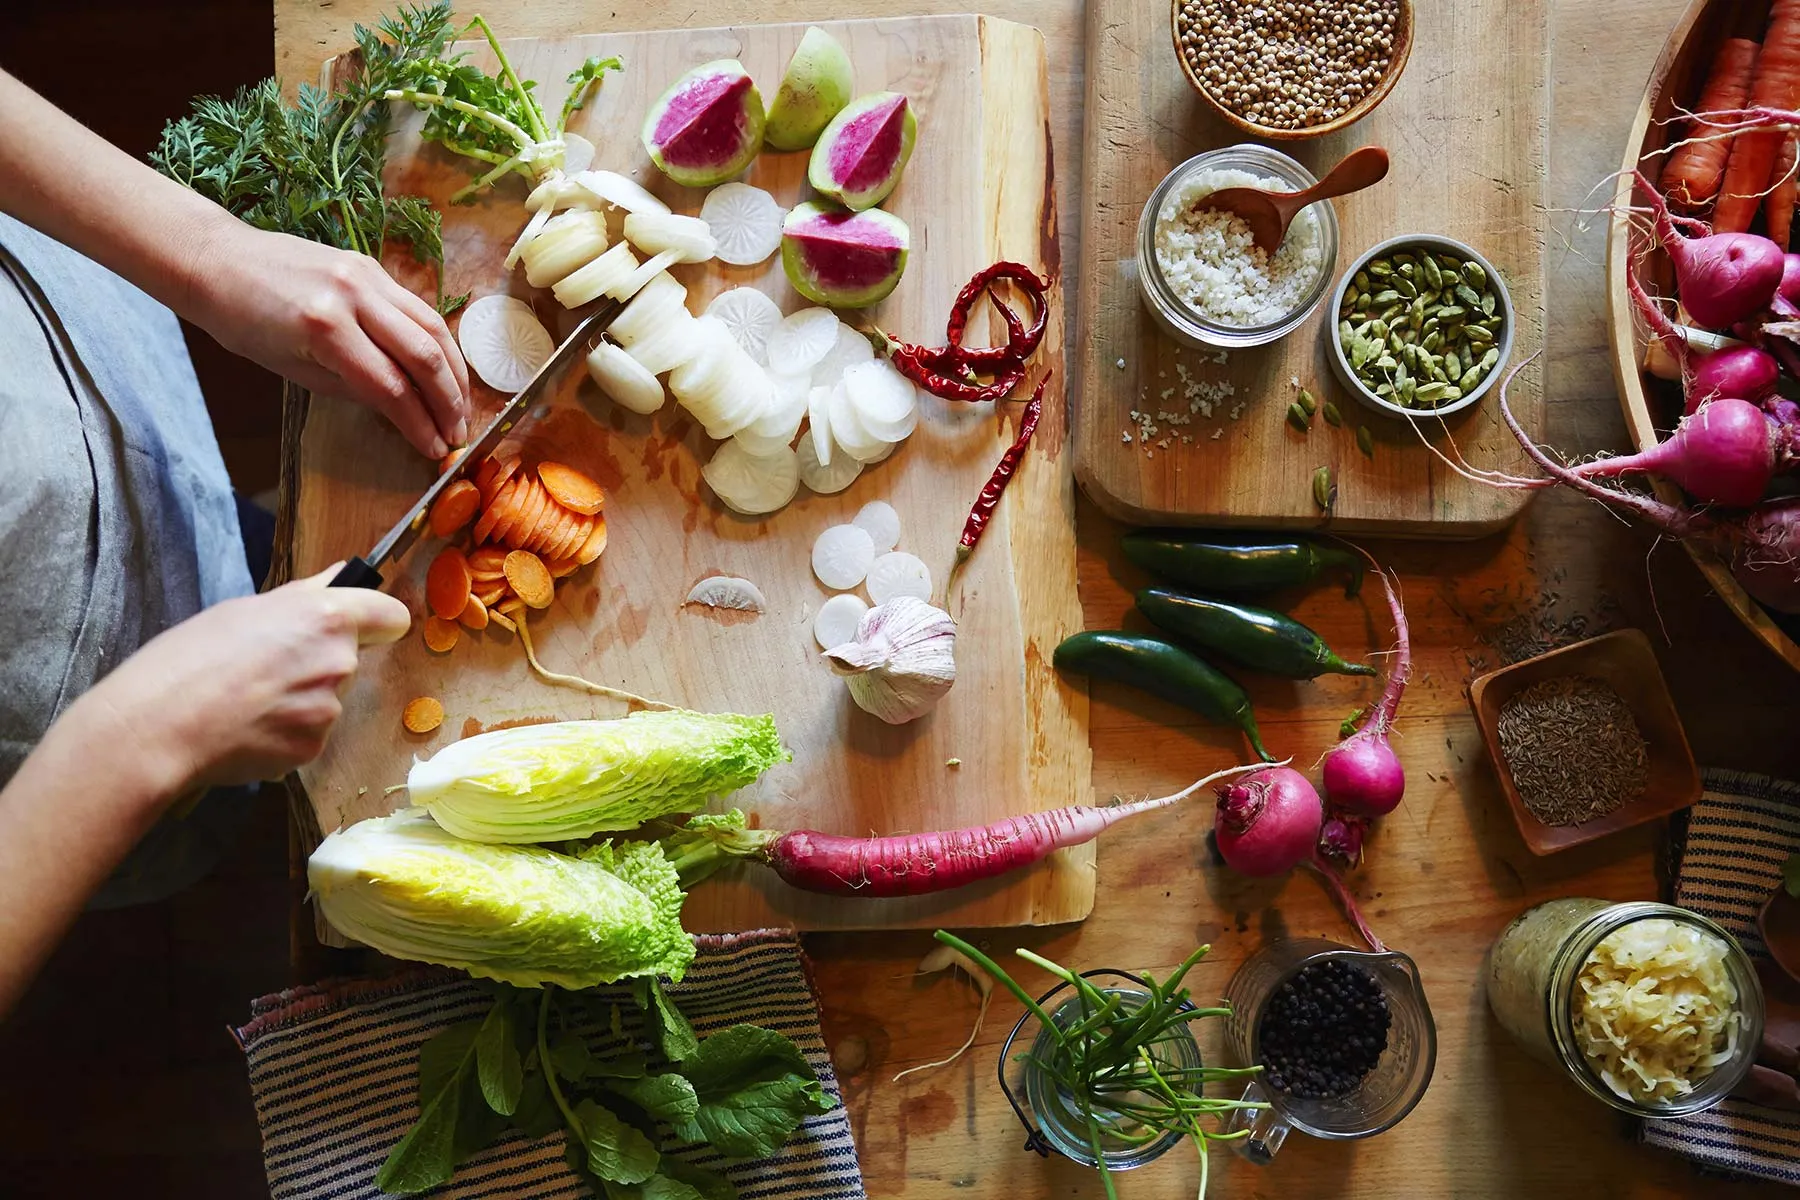 Young Adults Who Learn How to Cook Eat More Veggies